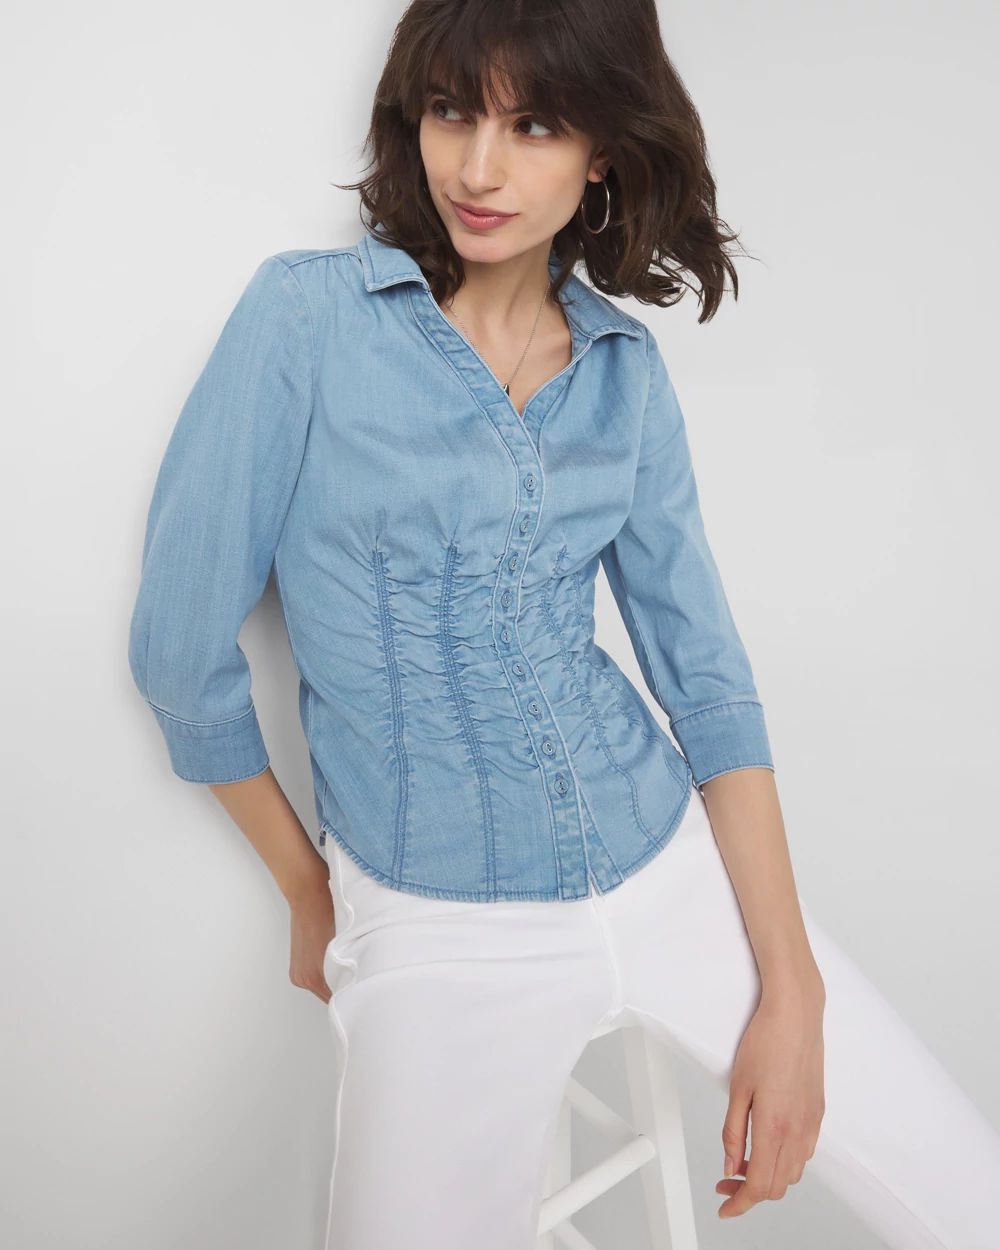 Petite Elbow-Sleeve Ruched Detail Shirt click to view larger image.